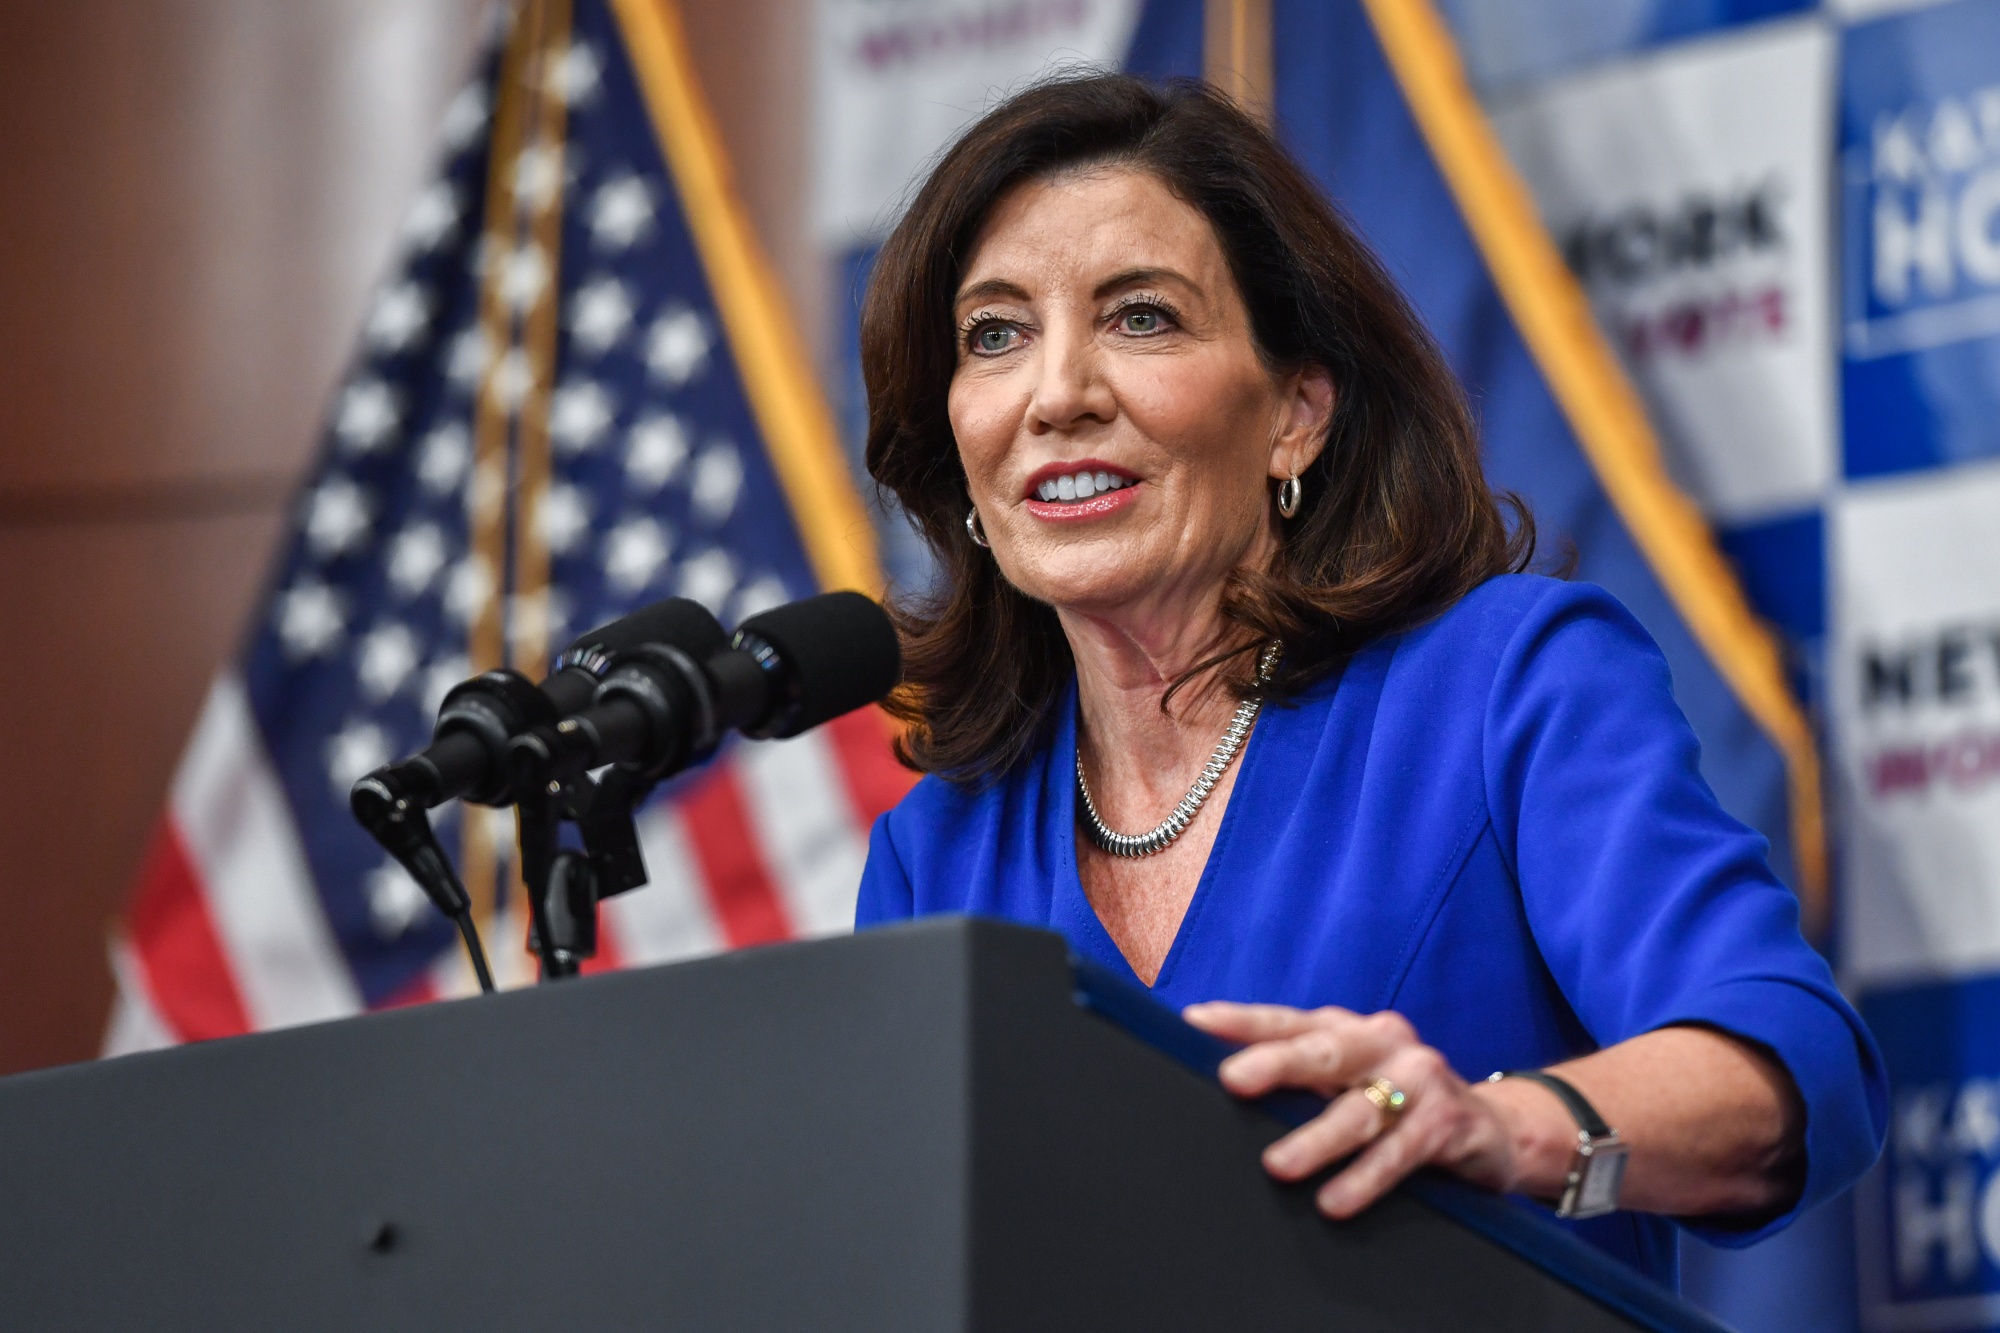 Kathy Hochul Defeats Lee Zeldin in 2022 New York Governor's Race - Bloomberg